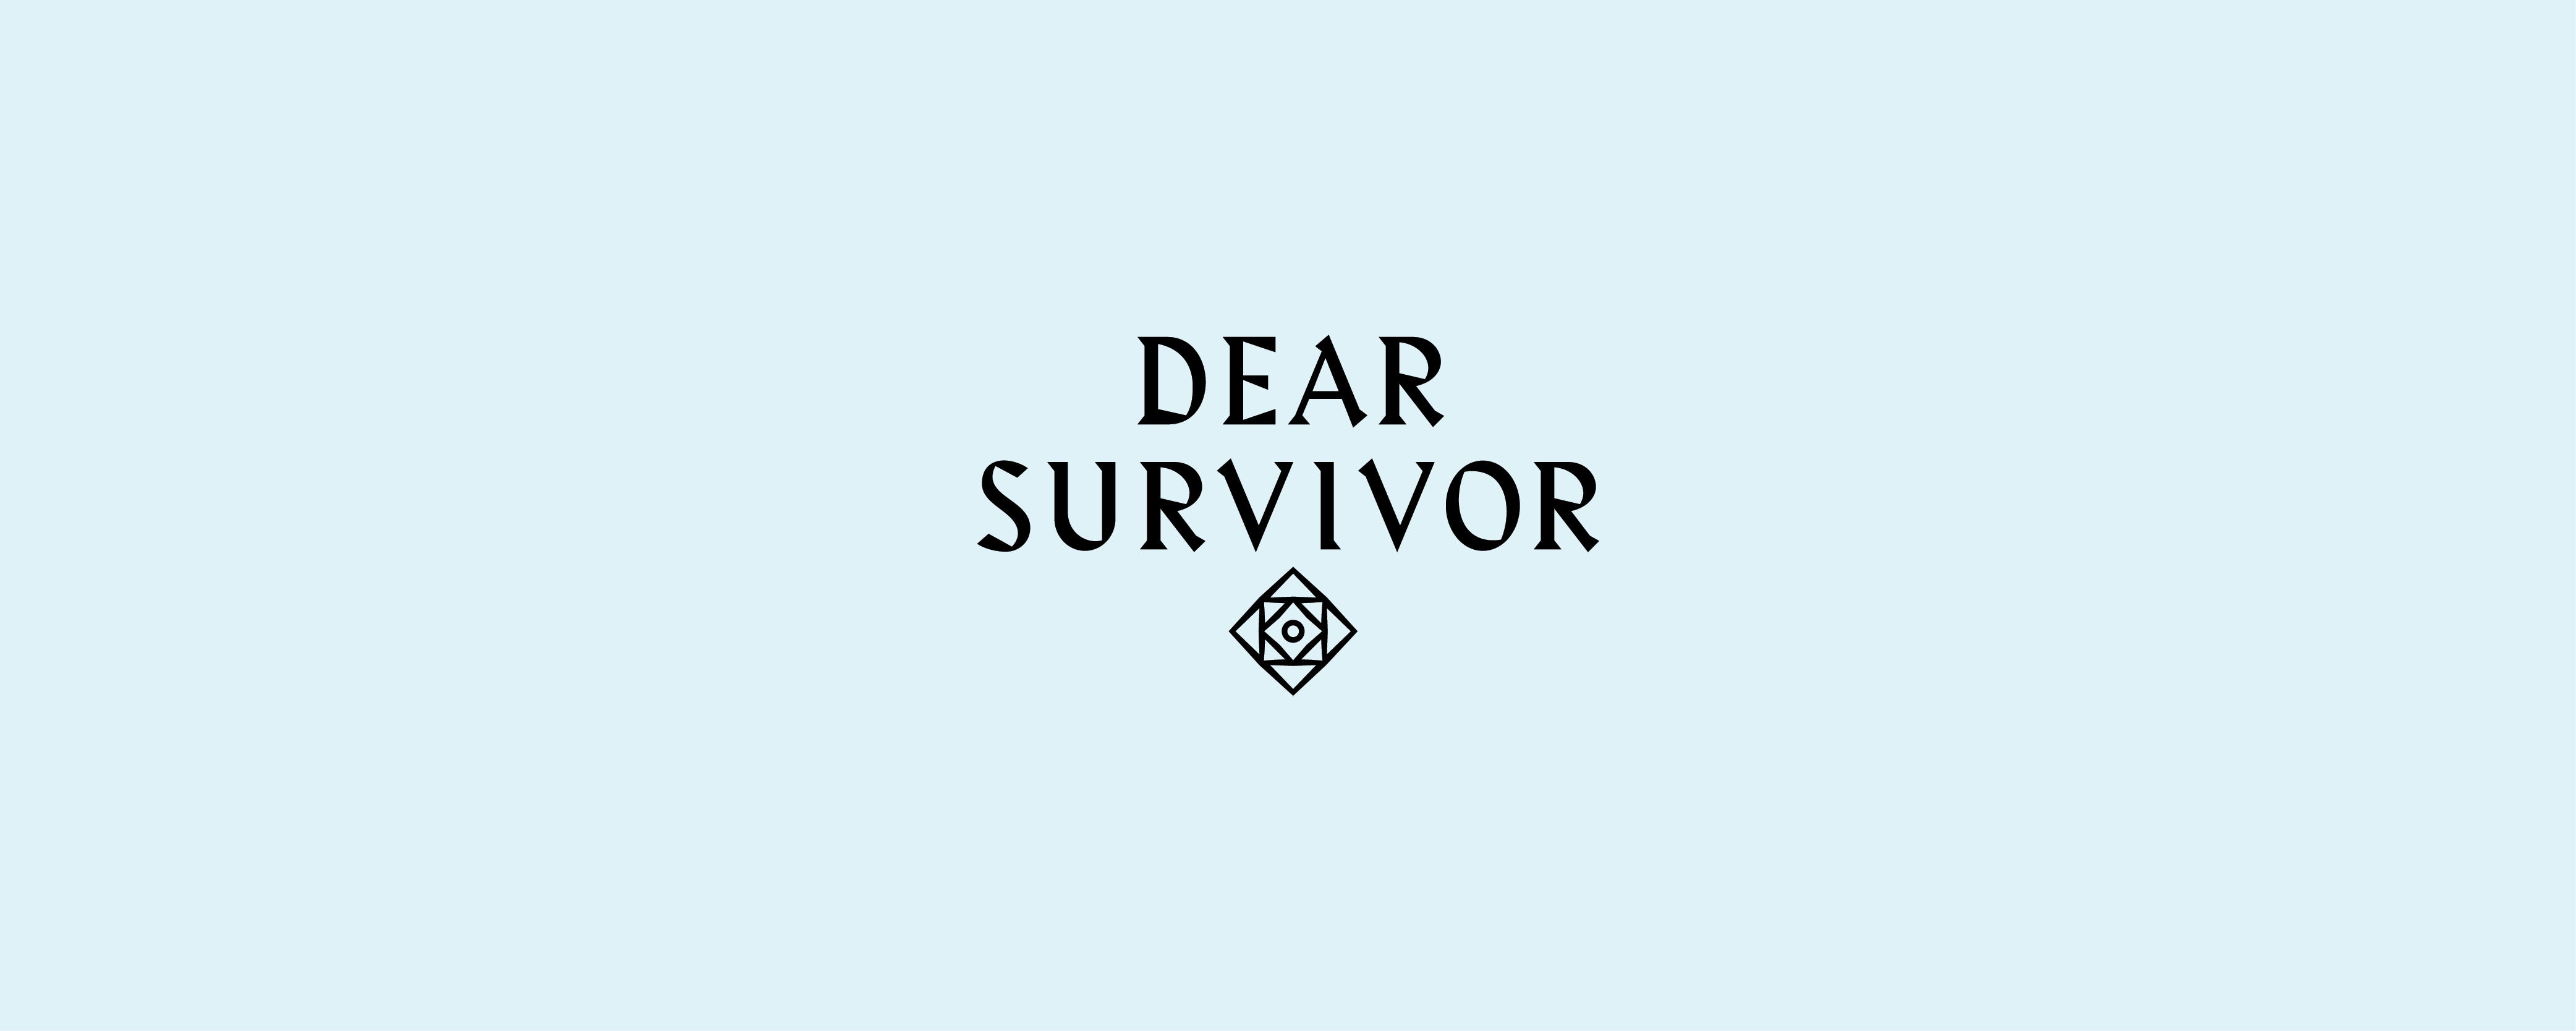 Welcome to the new Dear Survivor